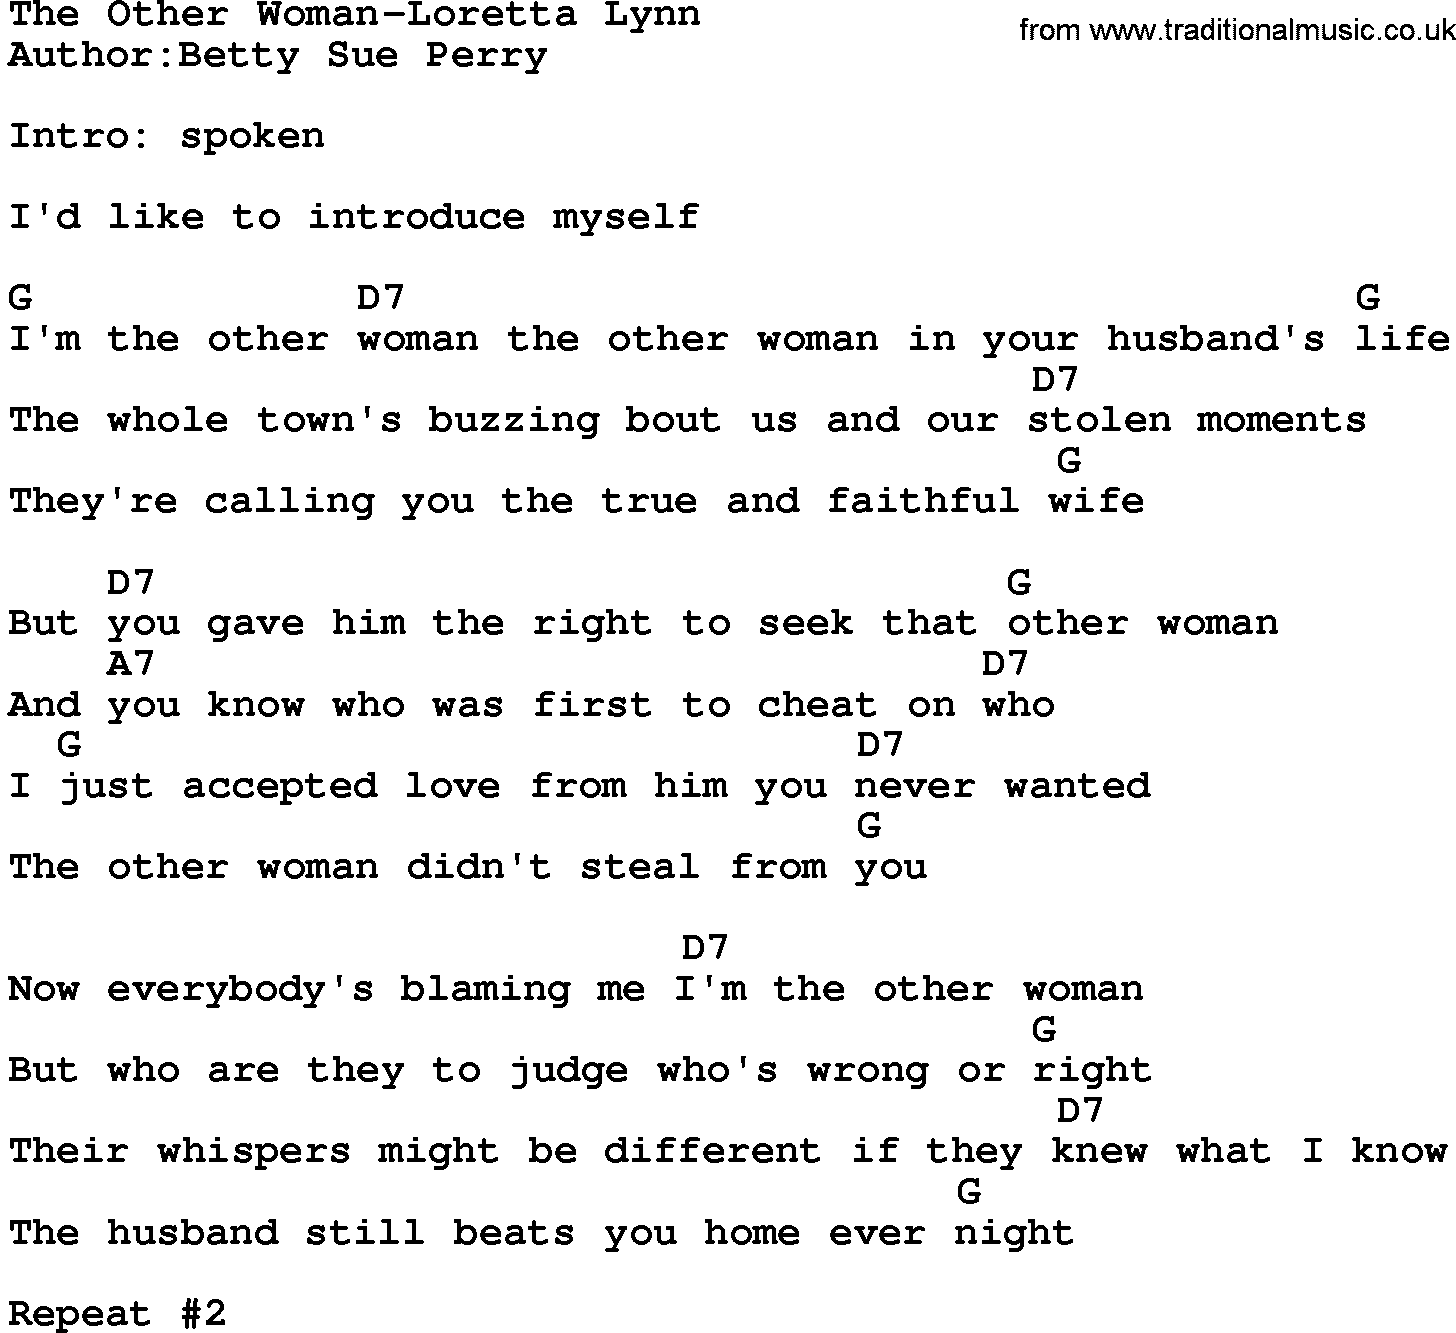 Country music song: The Other Woman-Loretta Lynn lyrics and chords